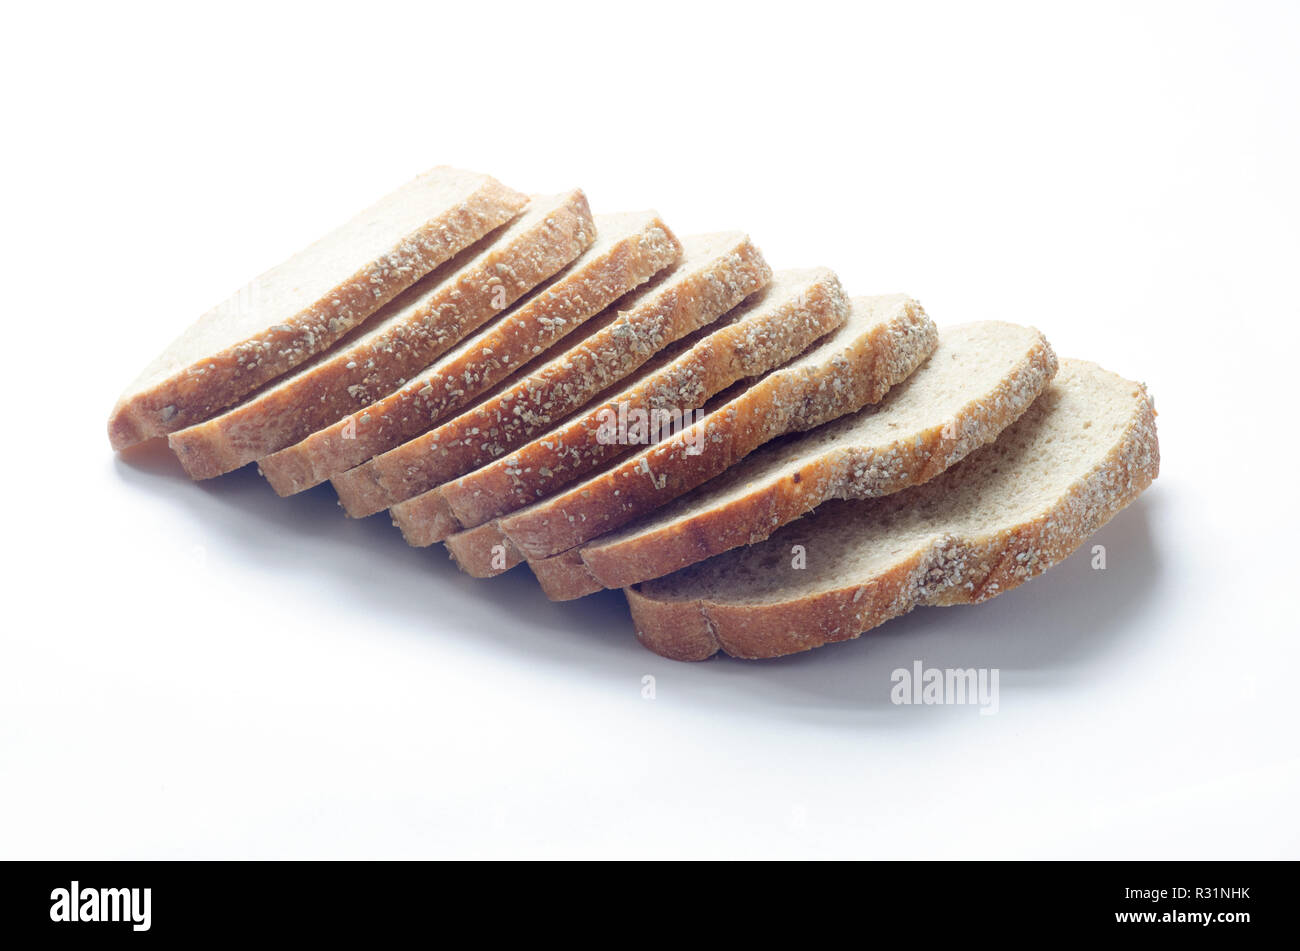 Ancient Grains Tuscan Pane sliced bread with whole wheat and spelt flours, whole grains and flax seeds on white. Stock Photo